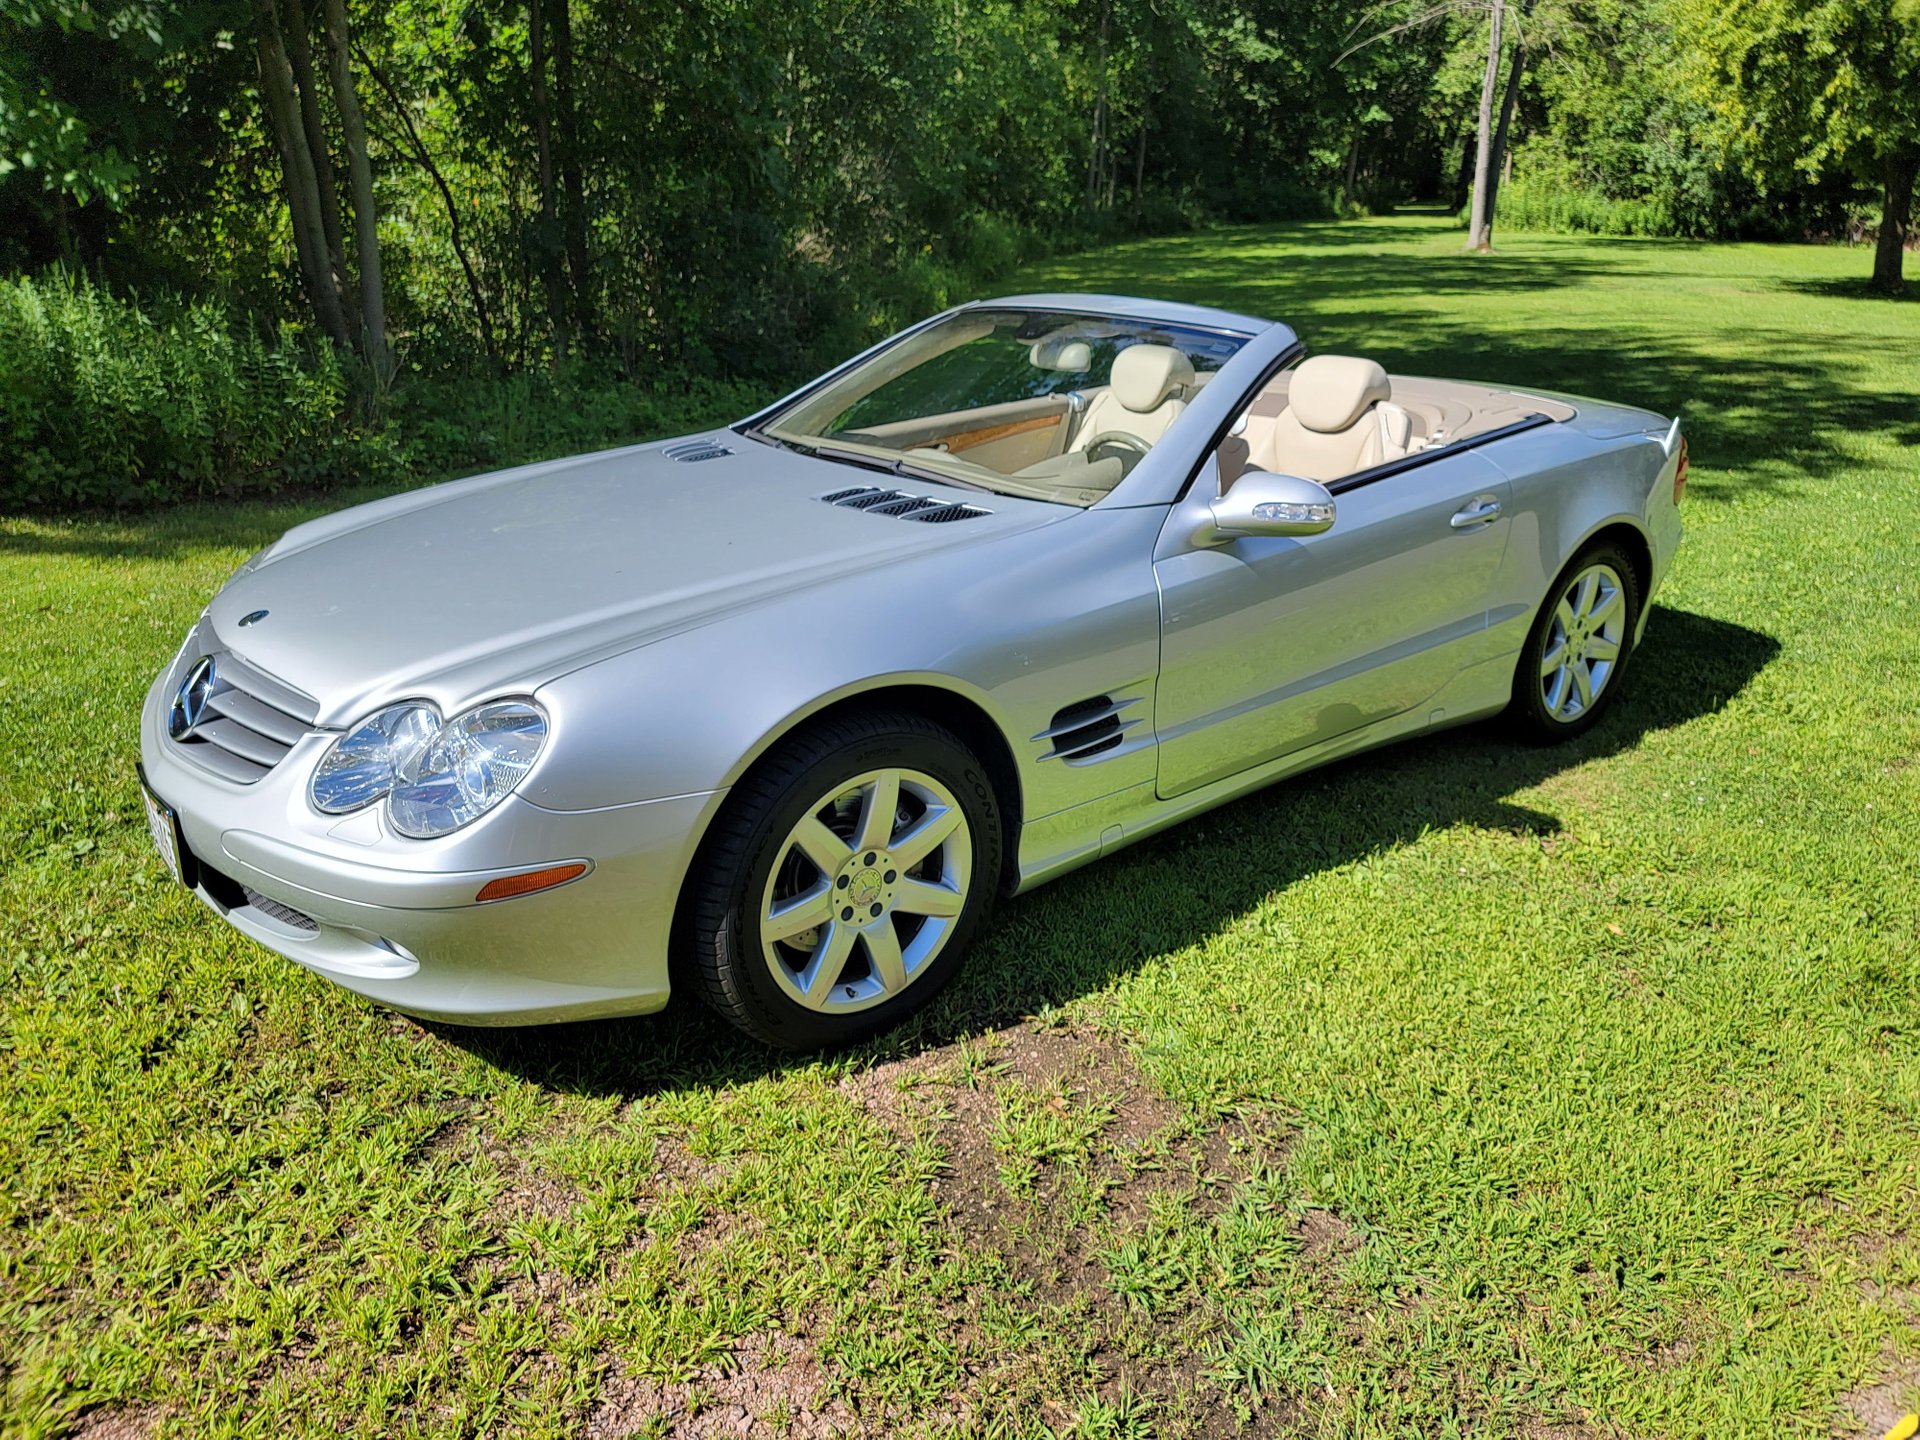 2003 Mercedes-Benz SL500 Roadster for sale #286599 | Motorious